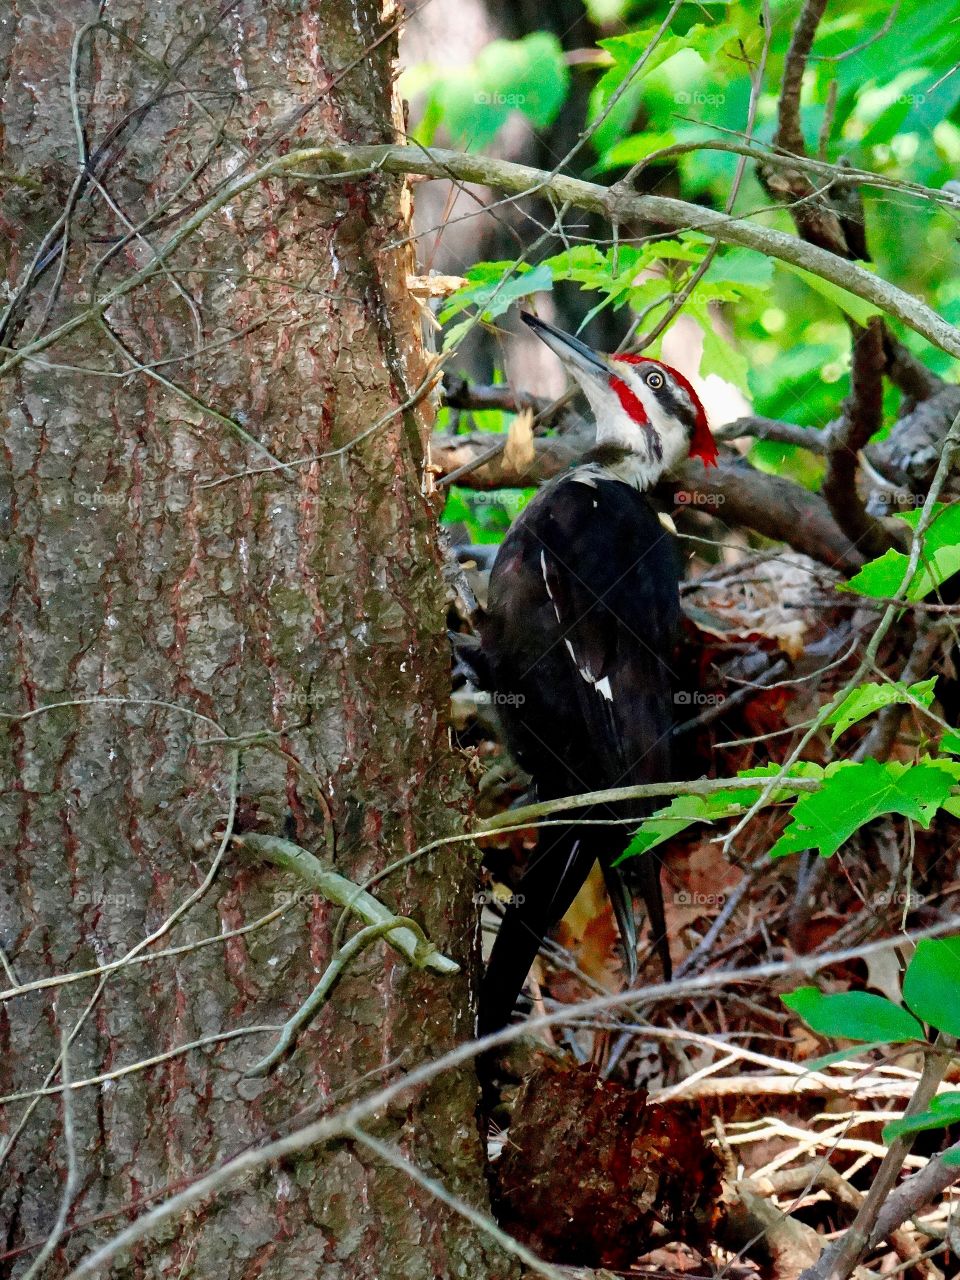 Distinctive red striping on the head of the Pileated Woodpecker. One big bird!